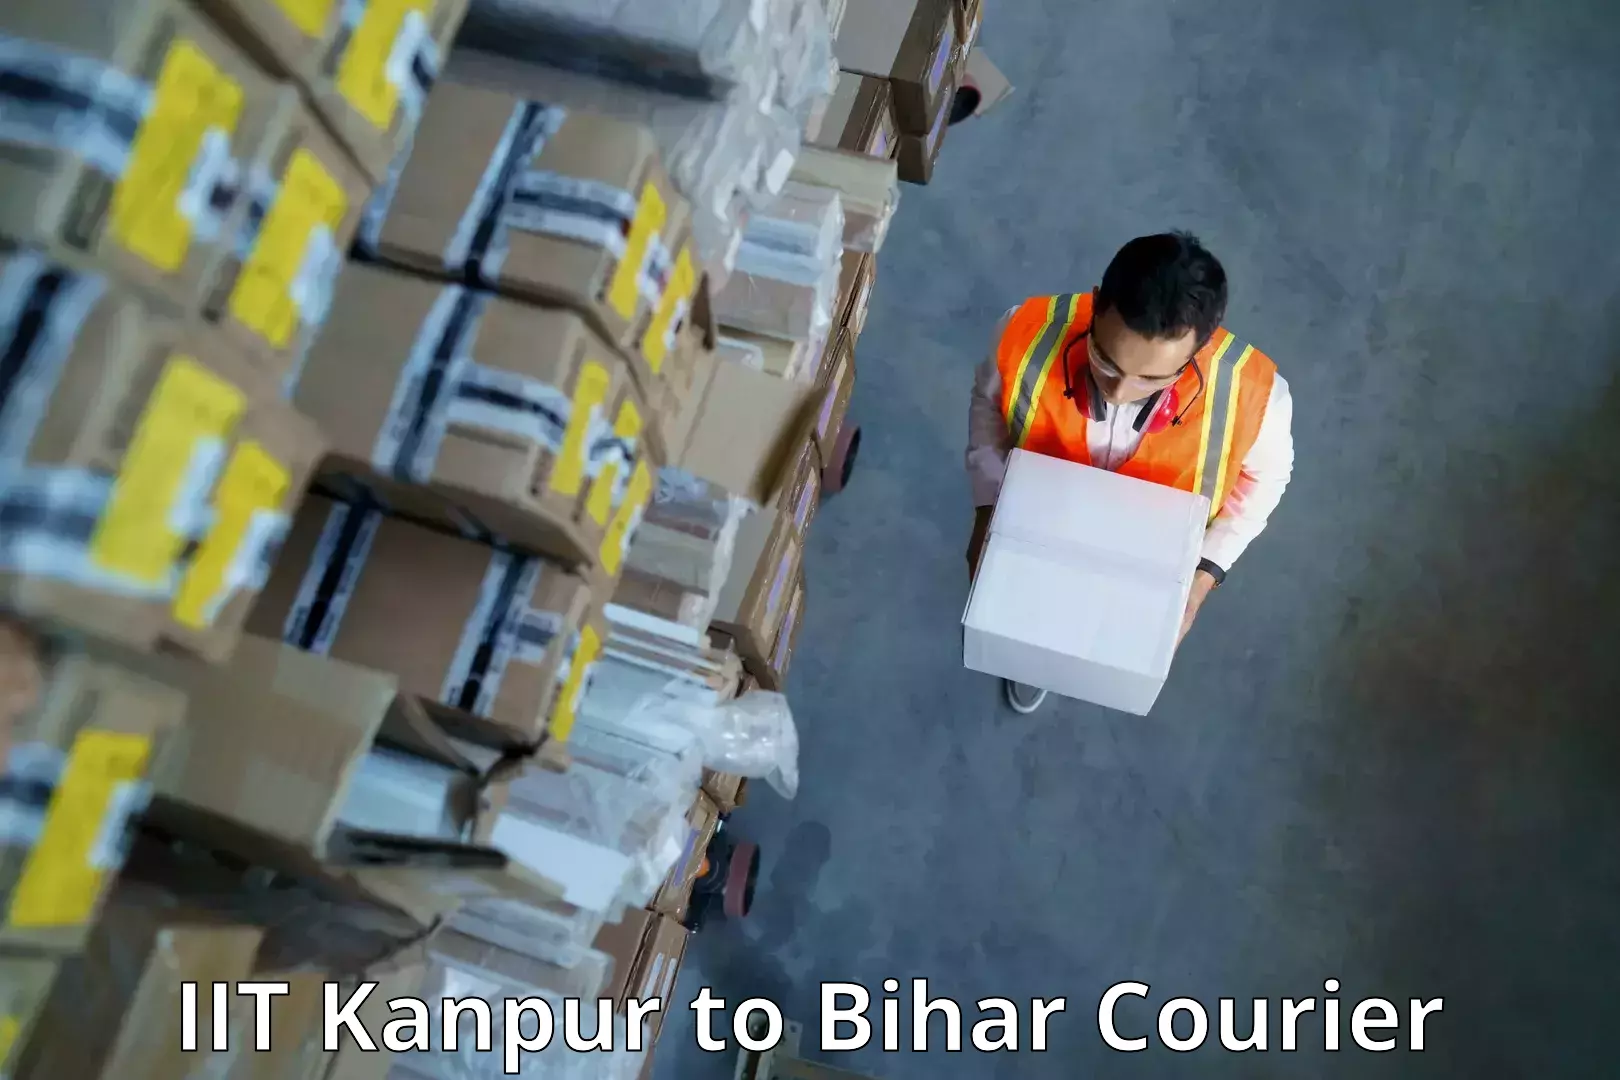 Express delivery network IIT Kanpur to Bihar